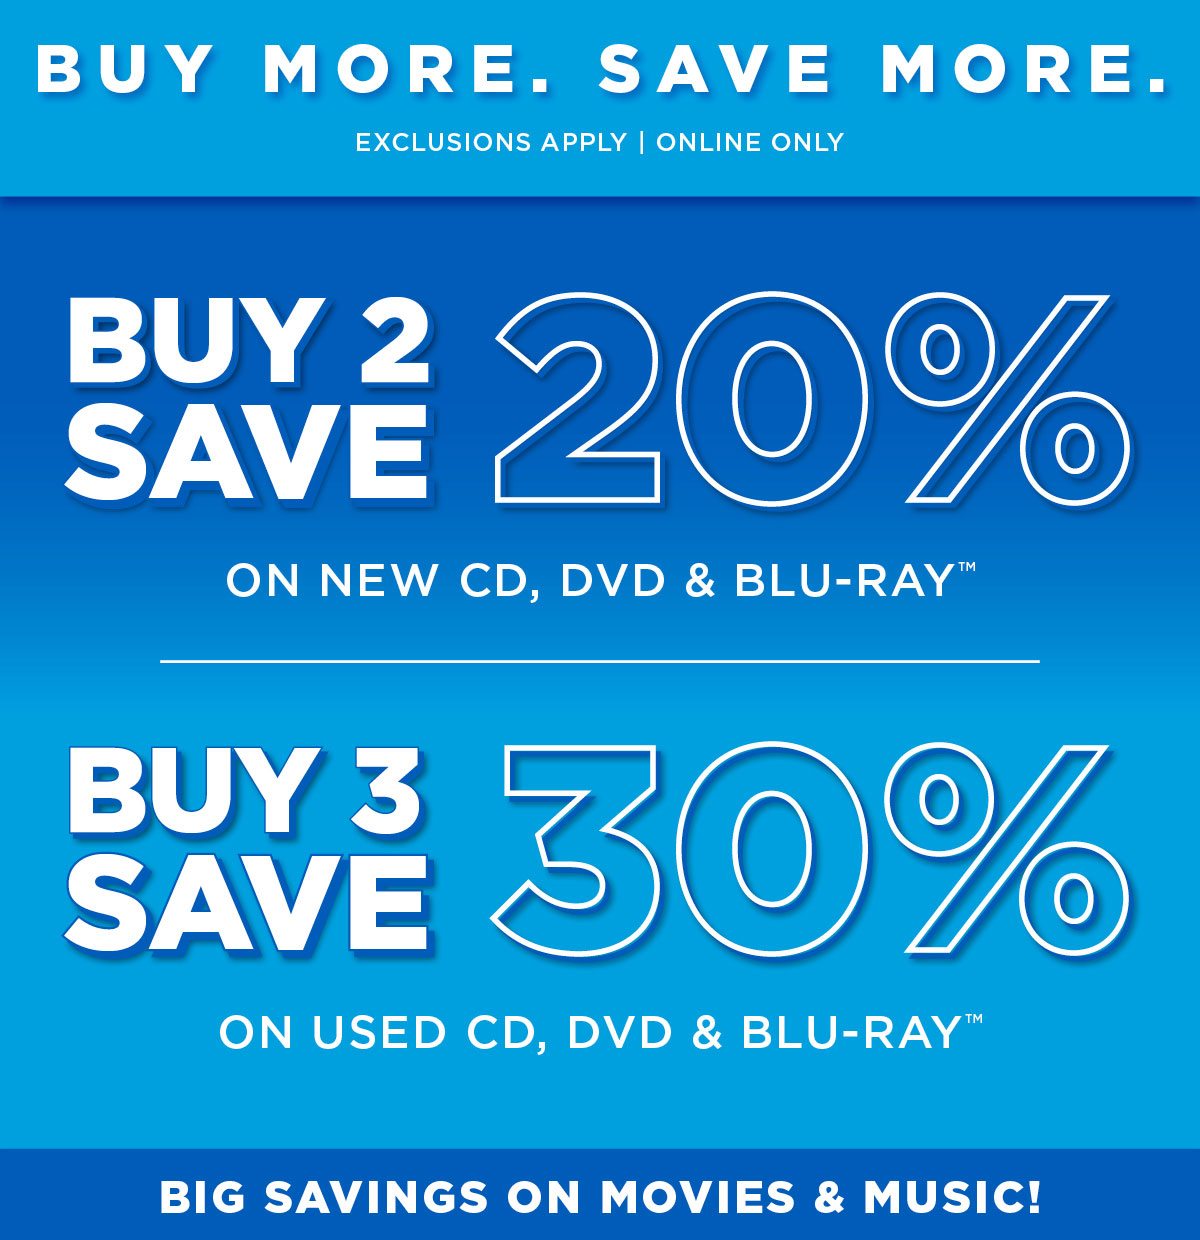 Buy More, Save More on CDs, DVDs, Blu-Ray & USED